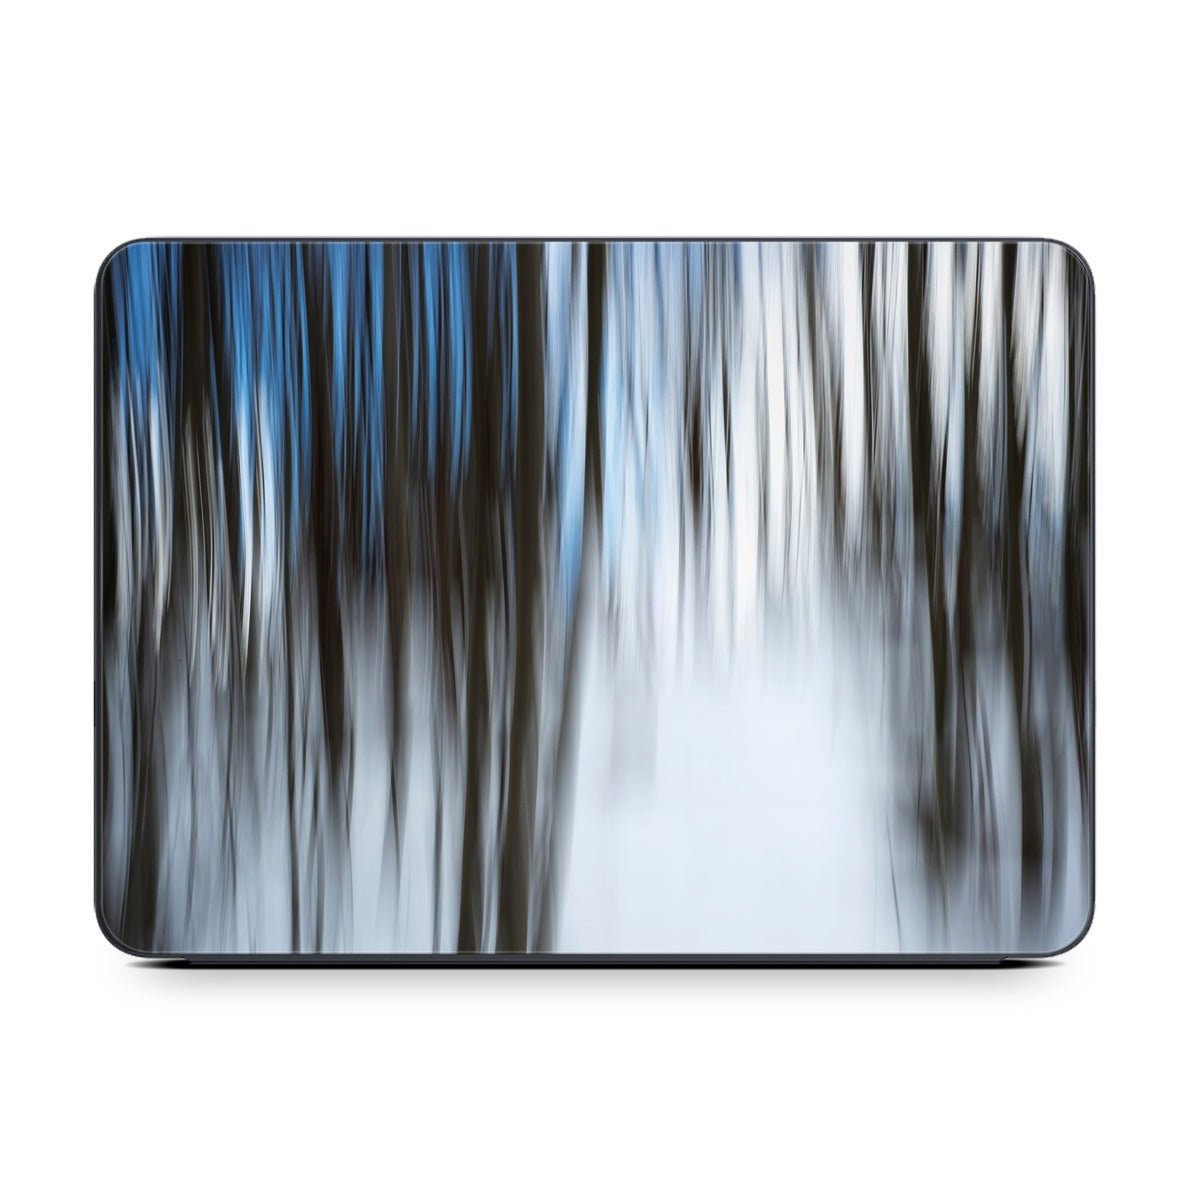 Abstract Forest - Apple Smart Keyboard Folio Skin - Andreas Stridsberg - DecalGirl